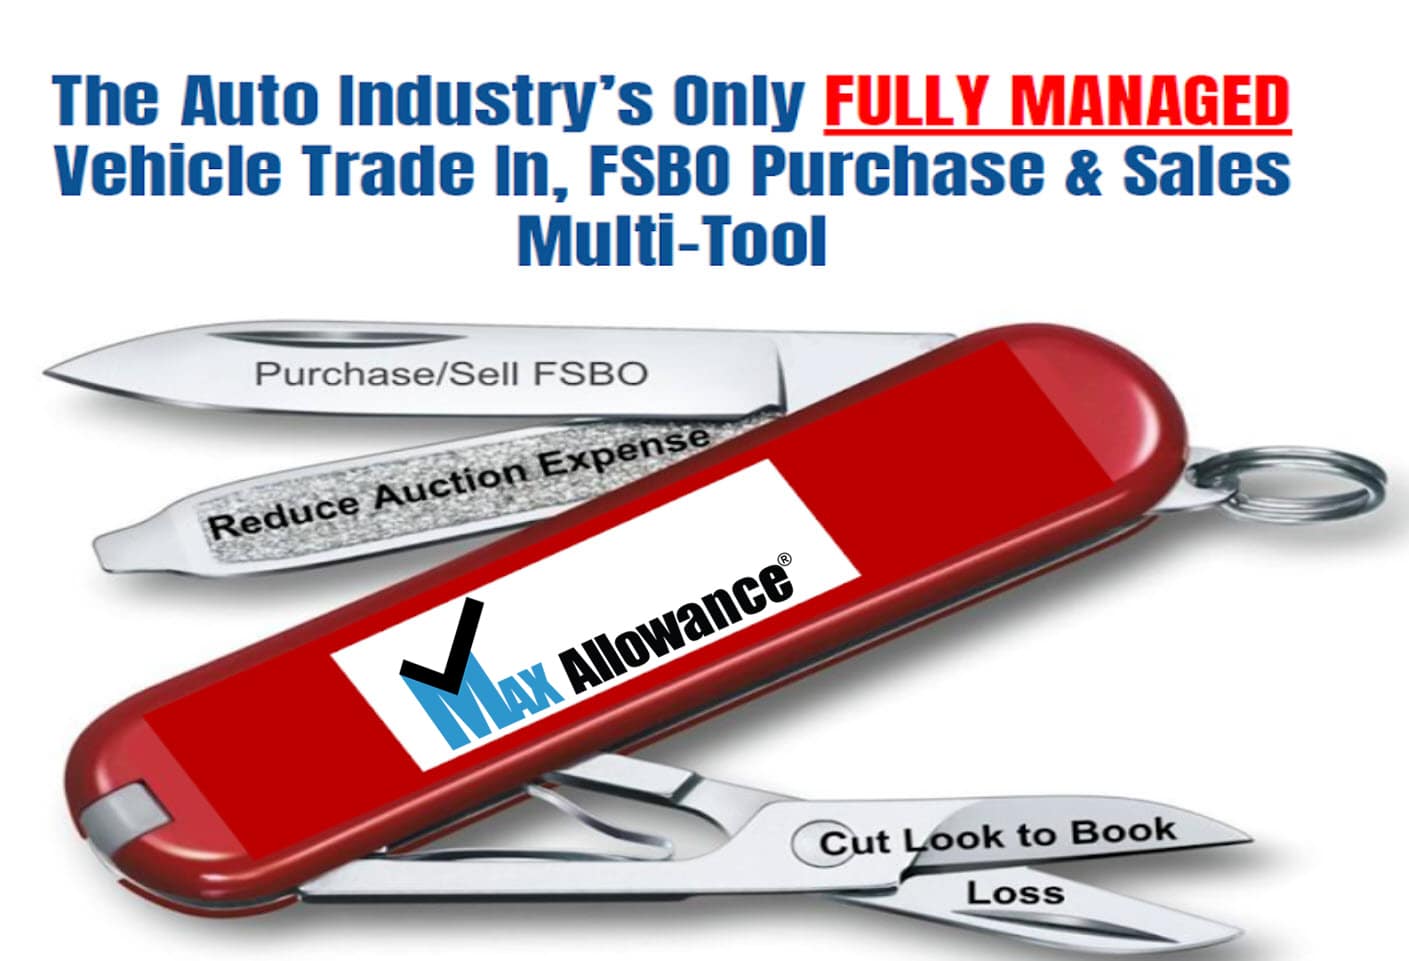 The Auto Industry's Only FULLY MANAGED vehicle trade in, FSBO purchase & sales mutli-tool.